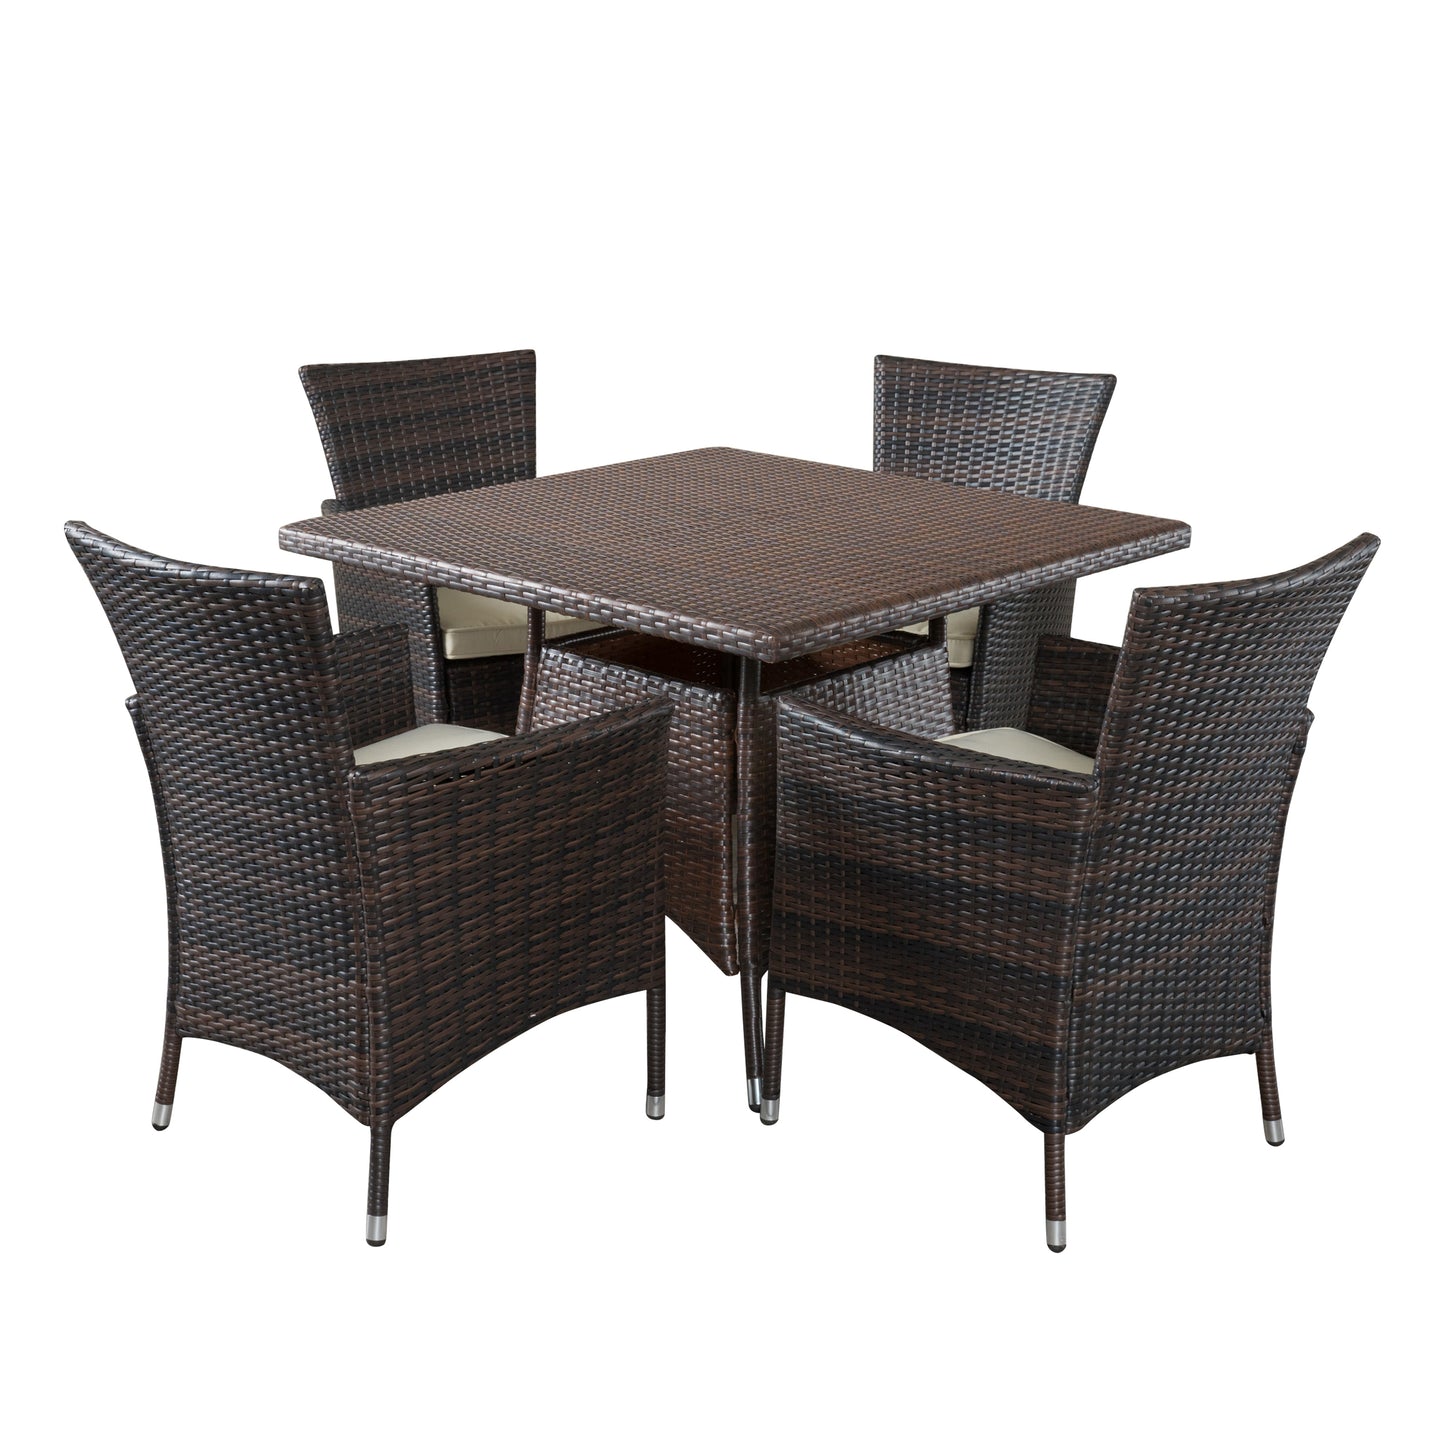 Clementine Outdoor 5pc Multibrown Wicker Square Dining Set